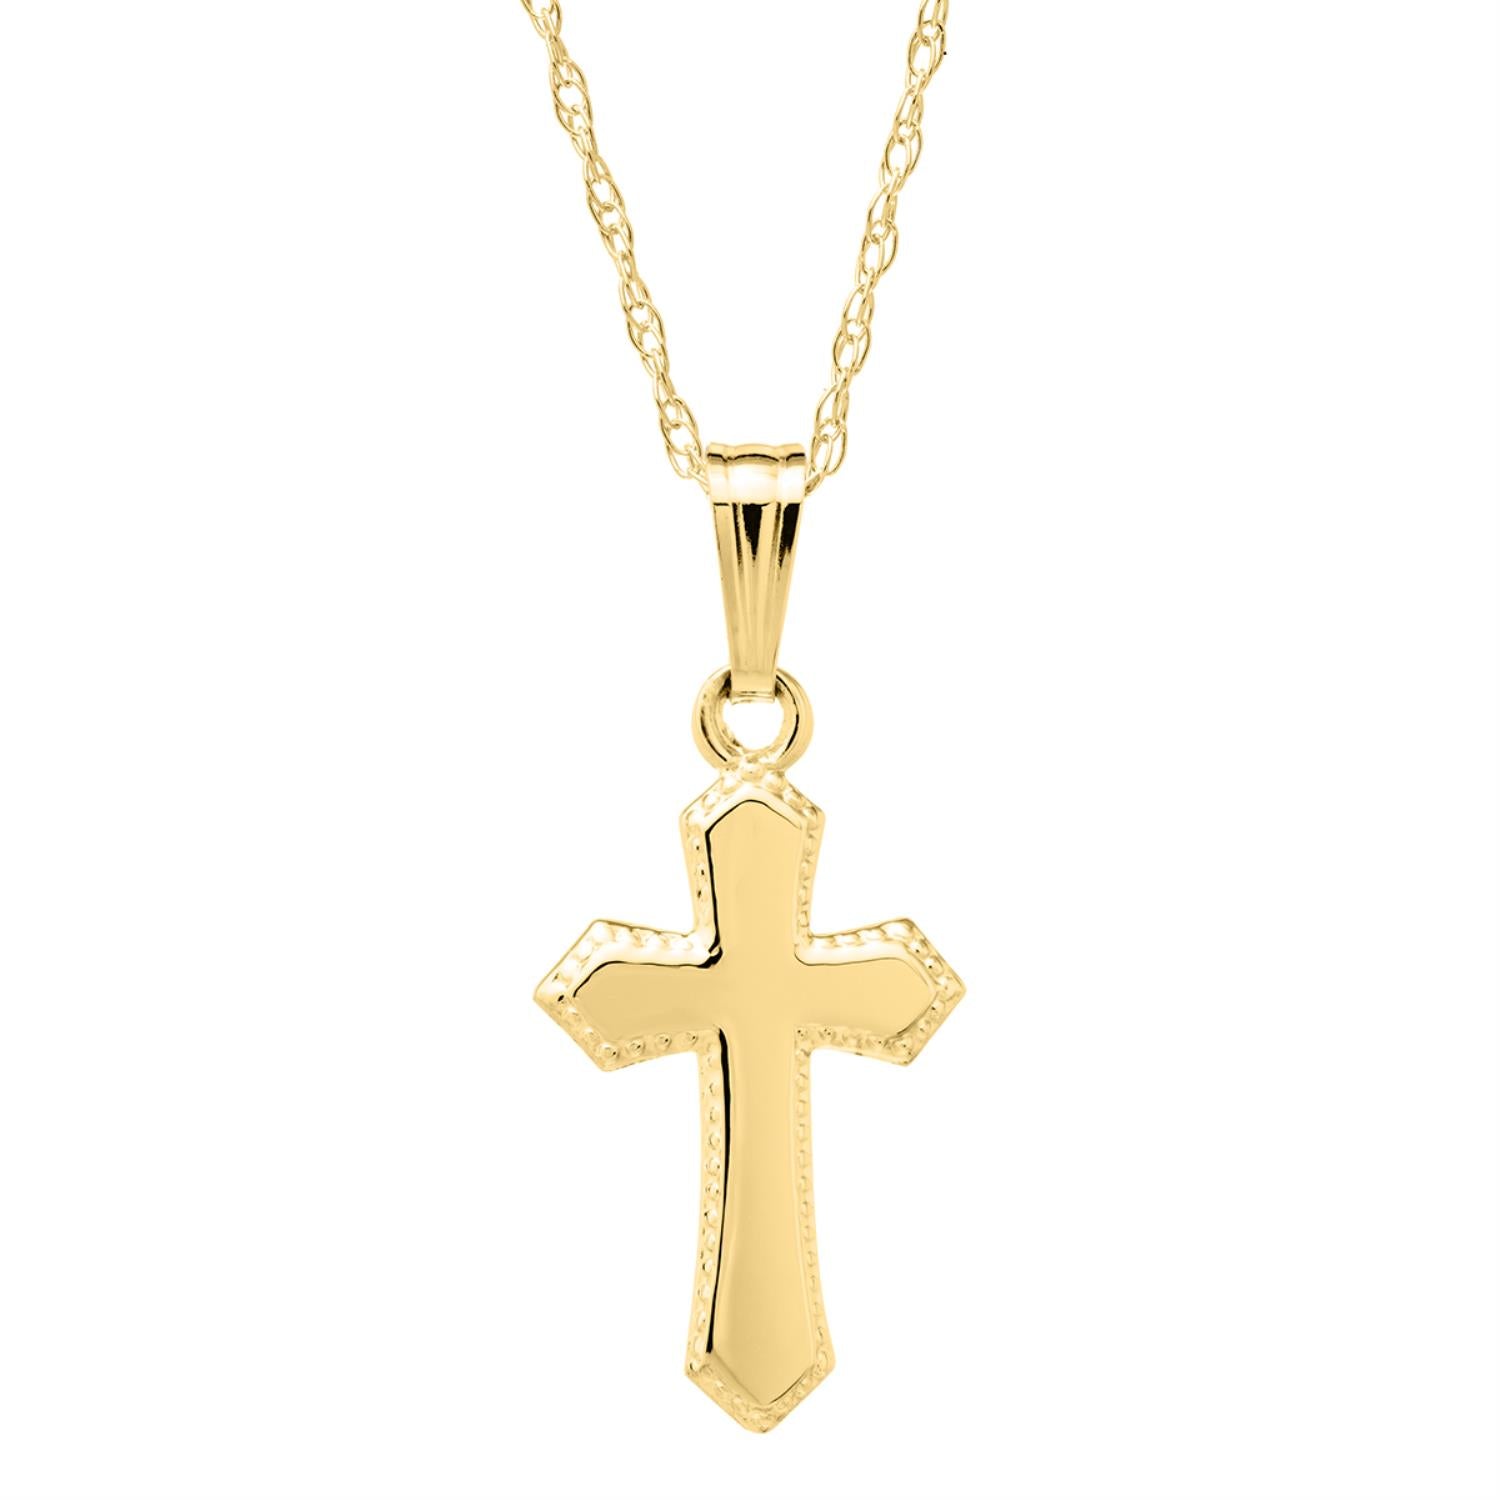 DAYA EMPIRE 14K Gold Figaro Chain Style Cross Pendant Necklace Solid Clasp  For Men,Women,Teens and Children Thin For Charms Choose Length 18